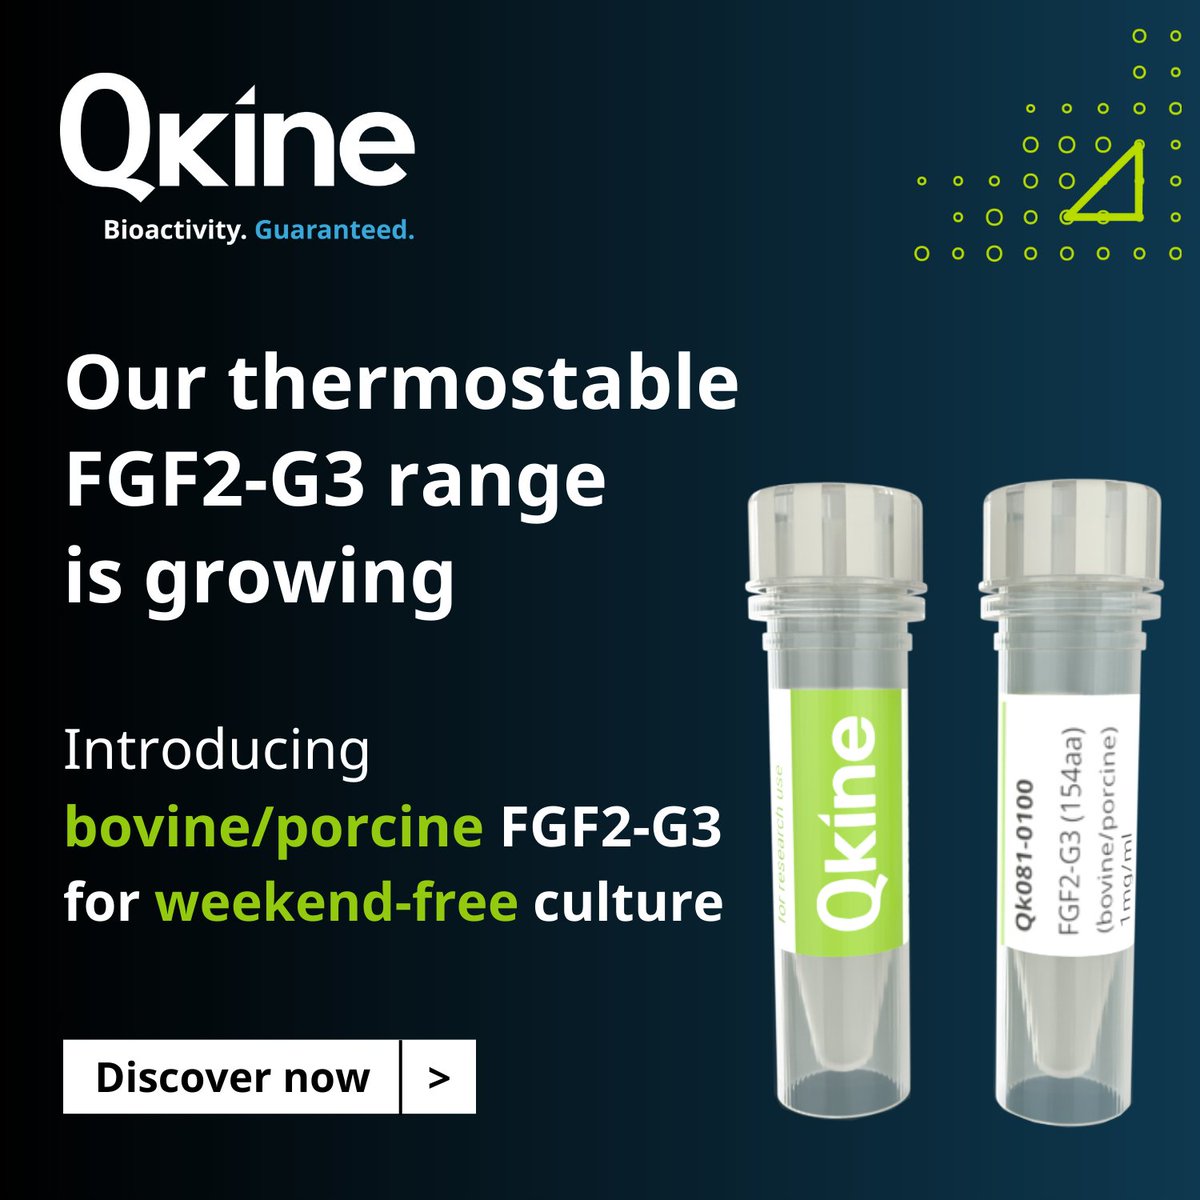 Introducing our latest animal-free thermostable FGF2-G3 for bovine/porcine applications. FGF2-G3 ensures stable culture conditions for over 7 days, supporting high-quality and cost-effective cell culture. Learn more - zurl.co/FavE #AnimalFree #ThermostableFGF2